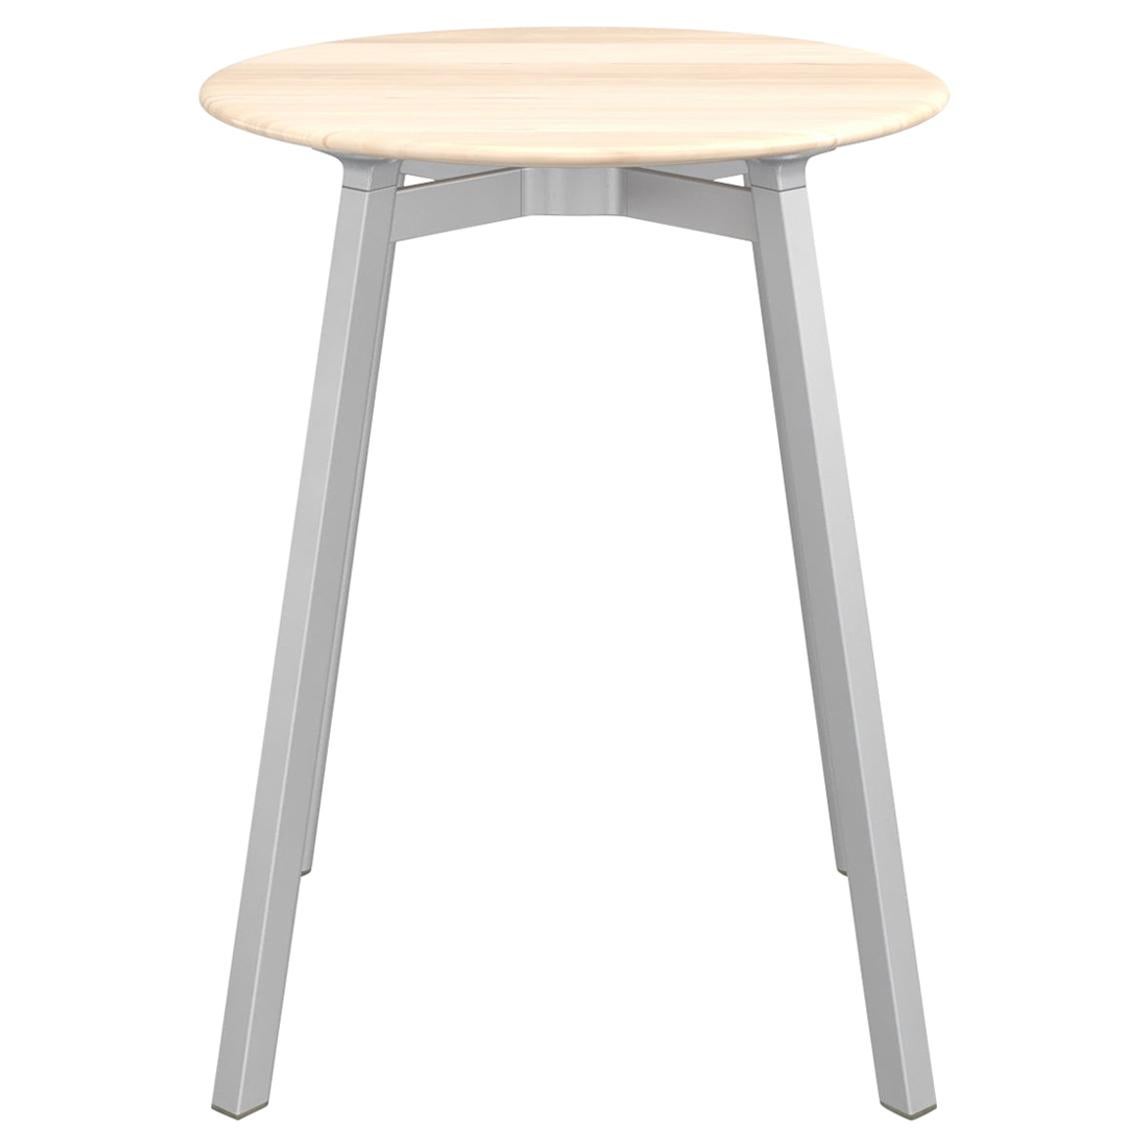 Emeco Su Small Round Cafe Table with Anodized Aluminum Frame & Wood Top by Nendo For Sale